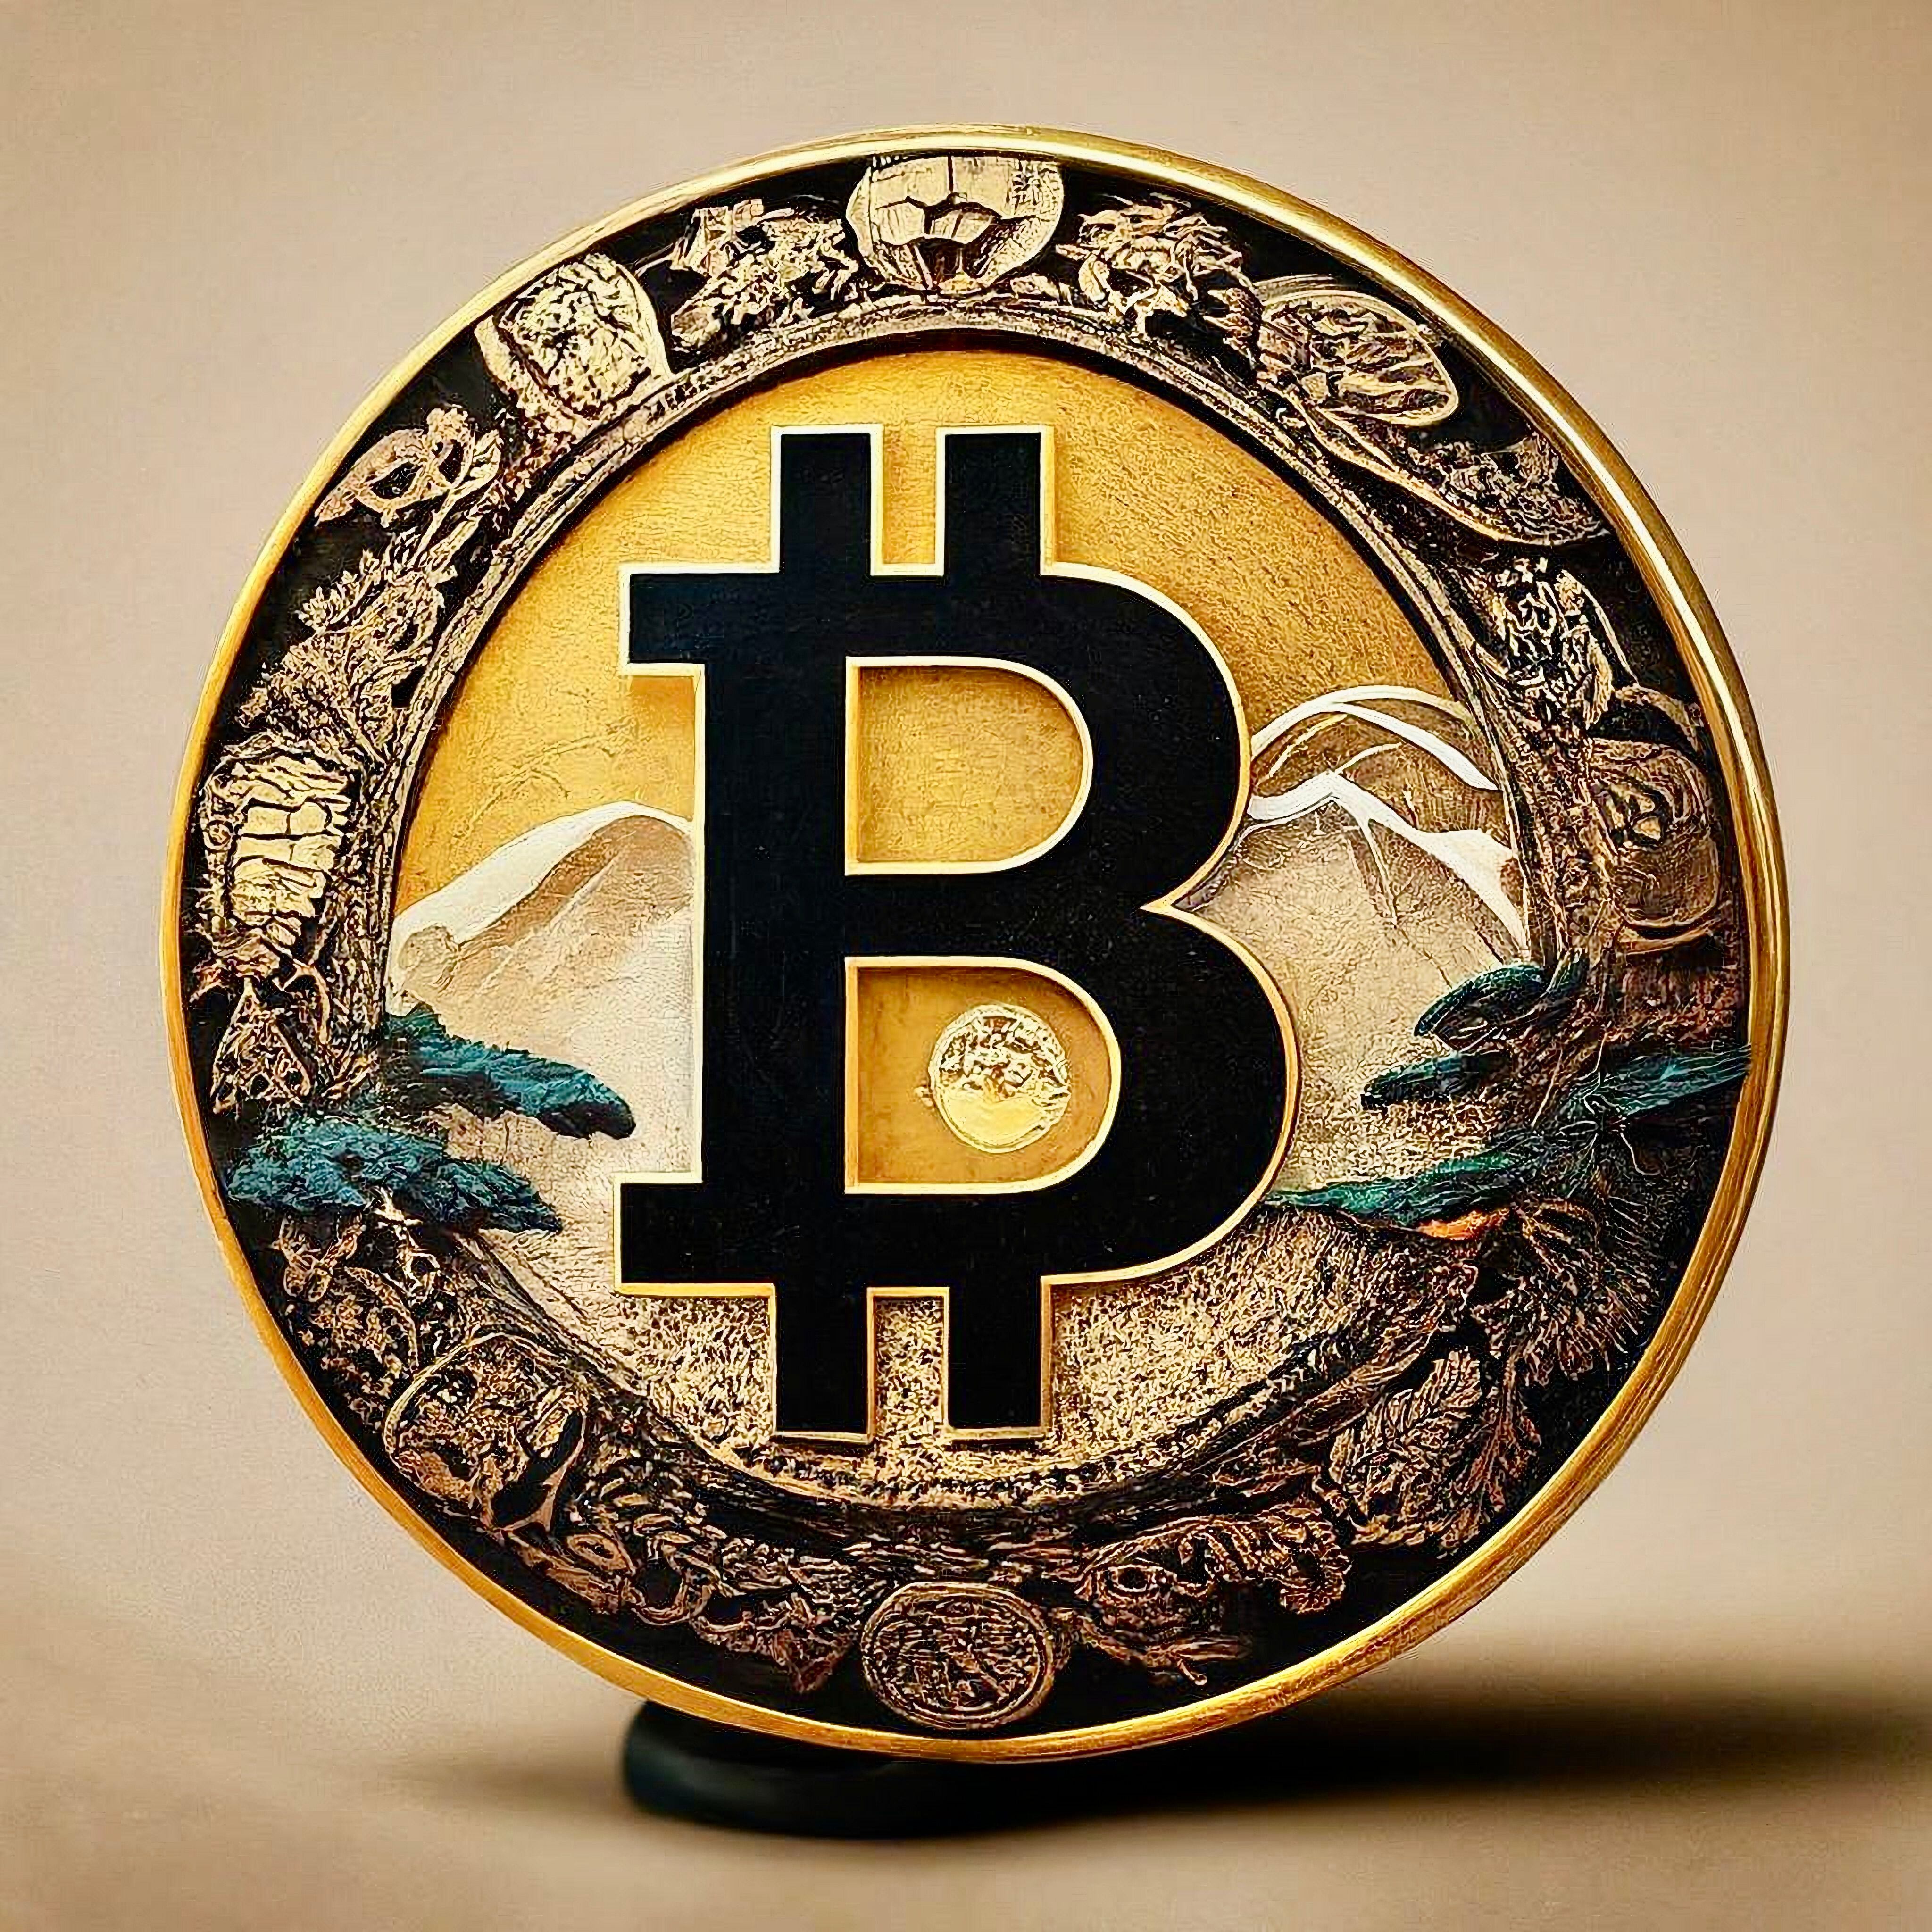 Japanese exchange DMM Bitcoin suffers ‘unauthorised leak’ of more than $300m